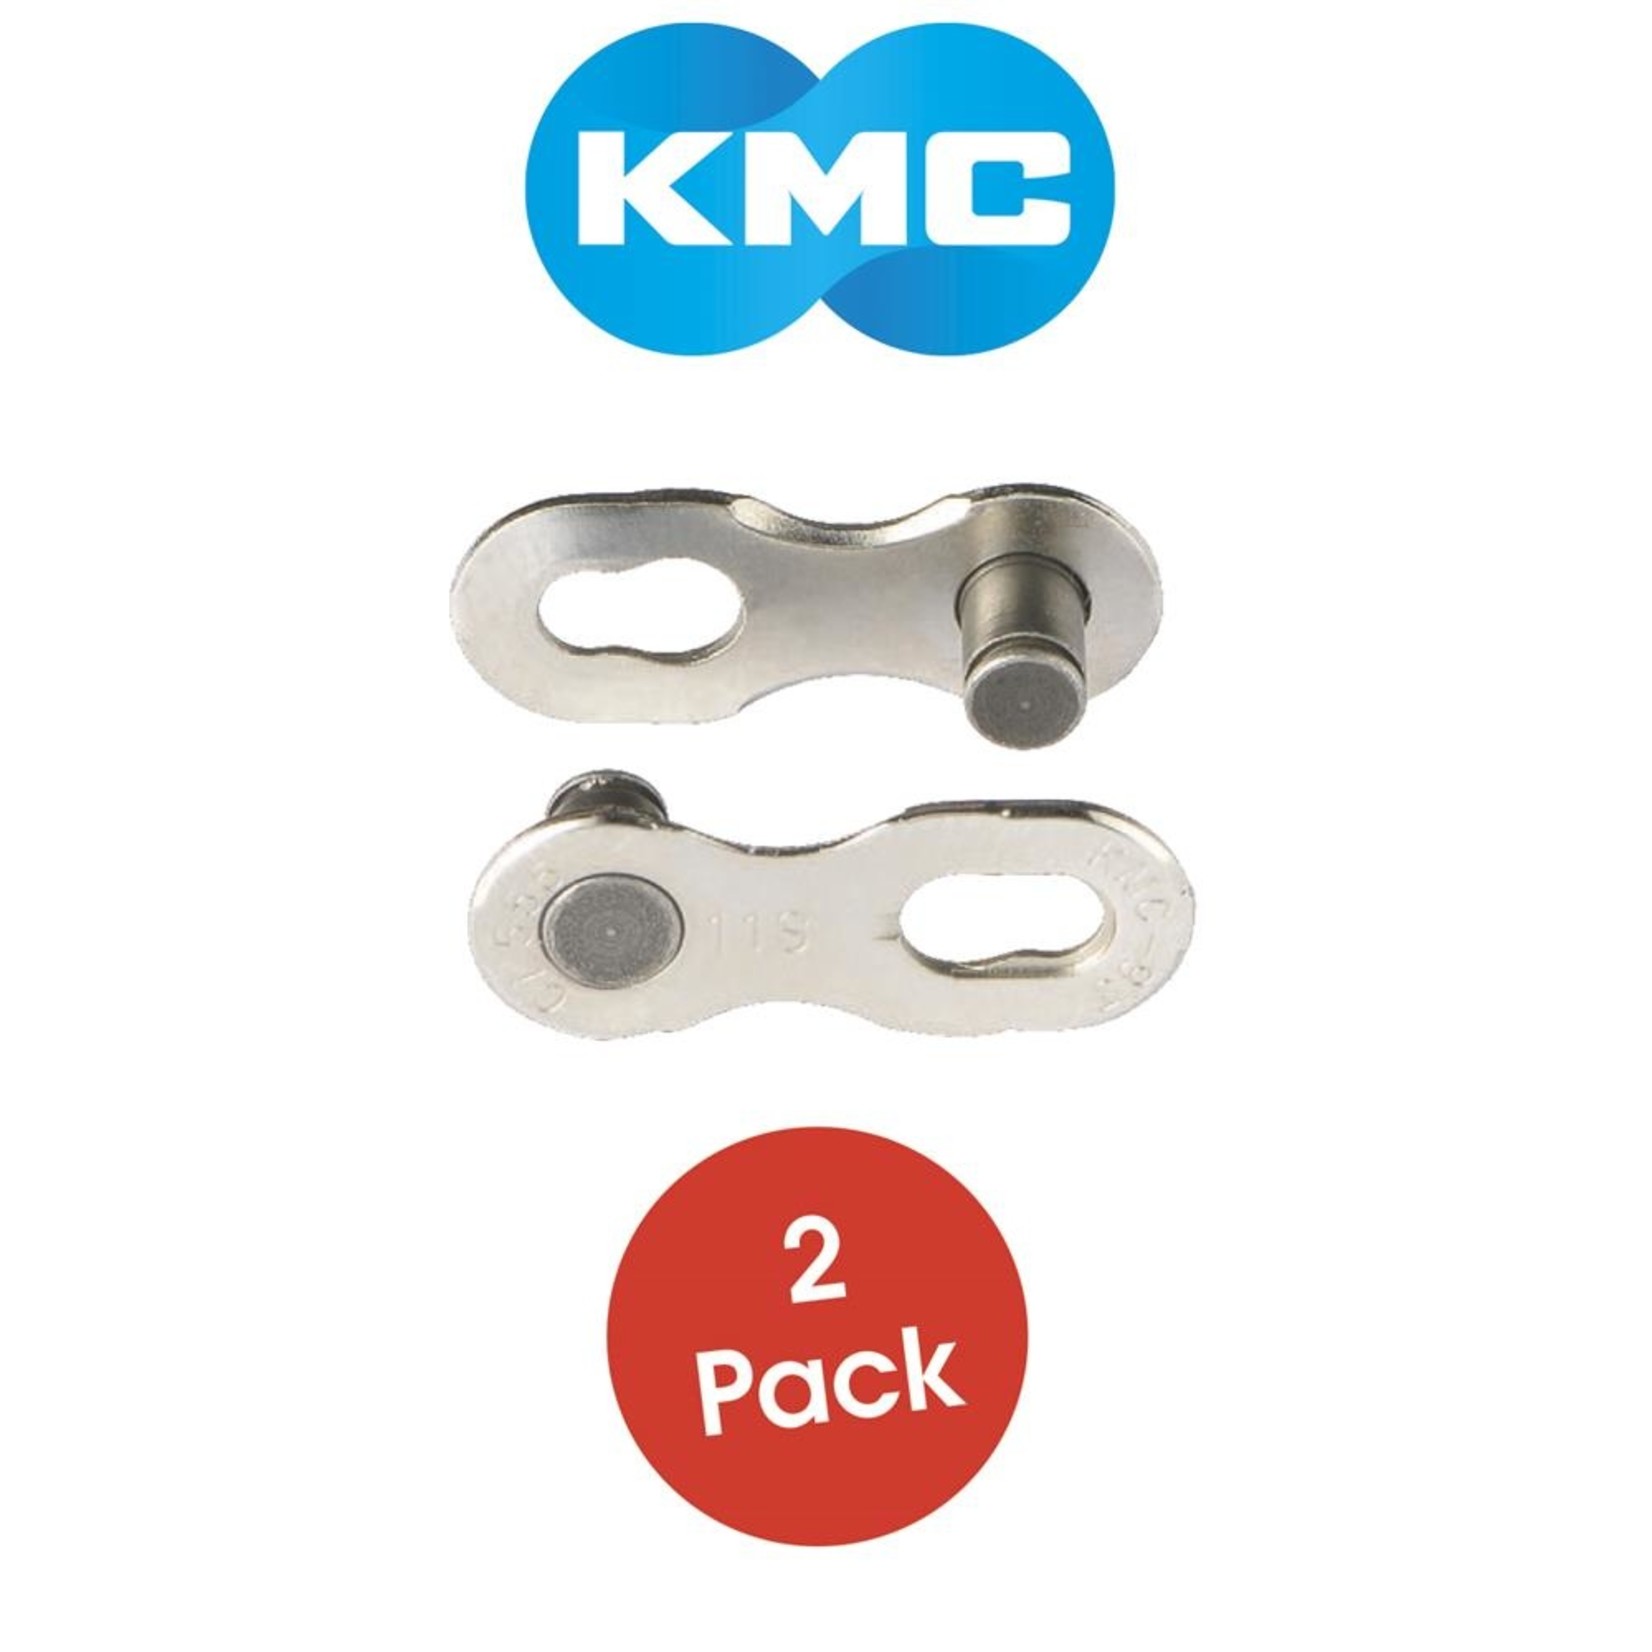 KMC KMC Bike Connecting Chain Links - 11 Speed - 2 Per Pack - Silver